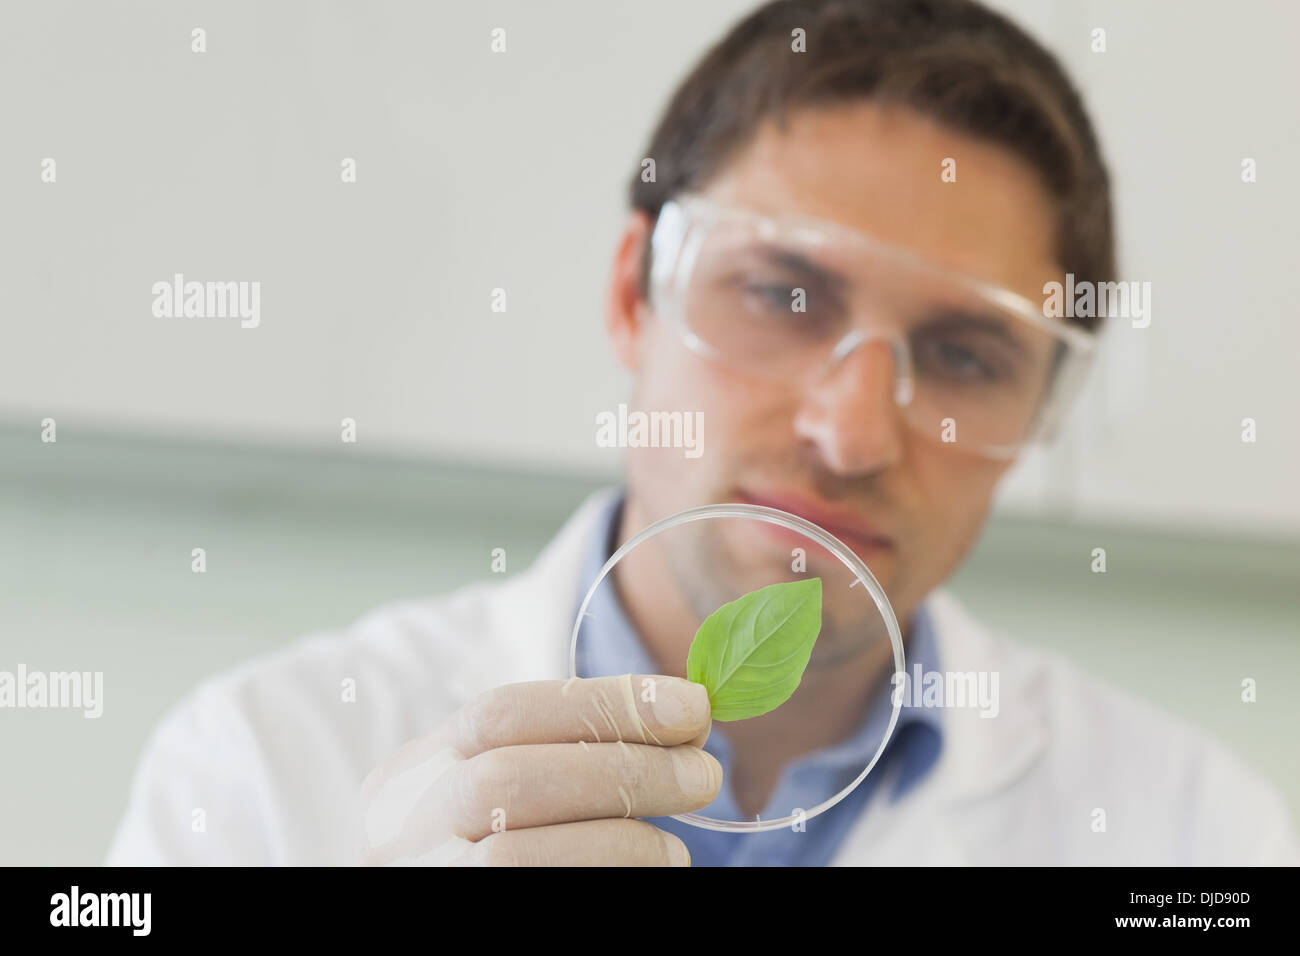 Handsome young scientist looking at a petri dish containing a leaf Stock Photo